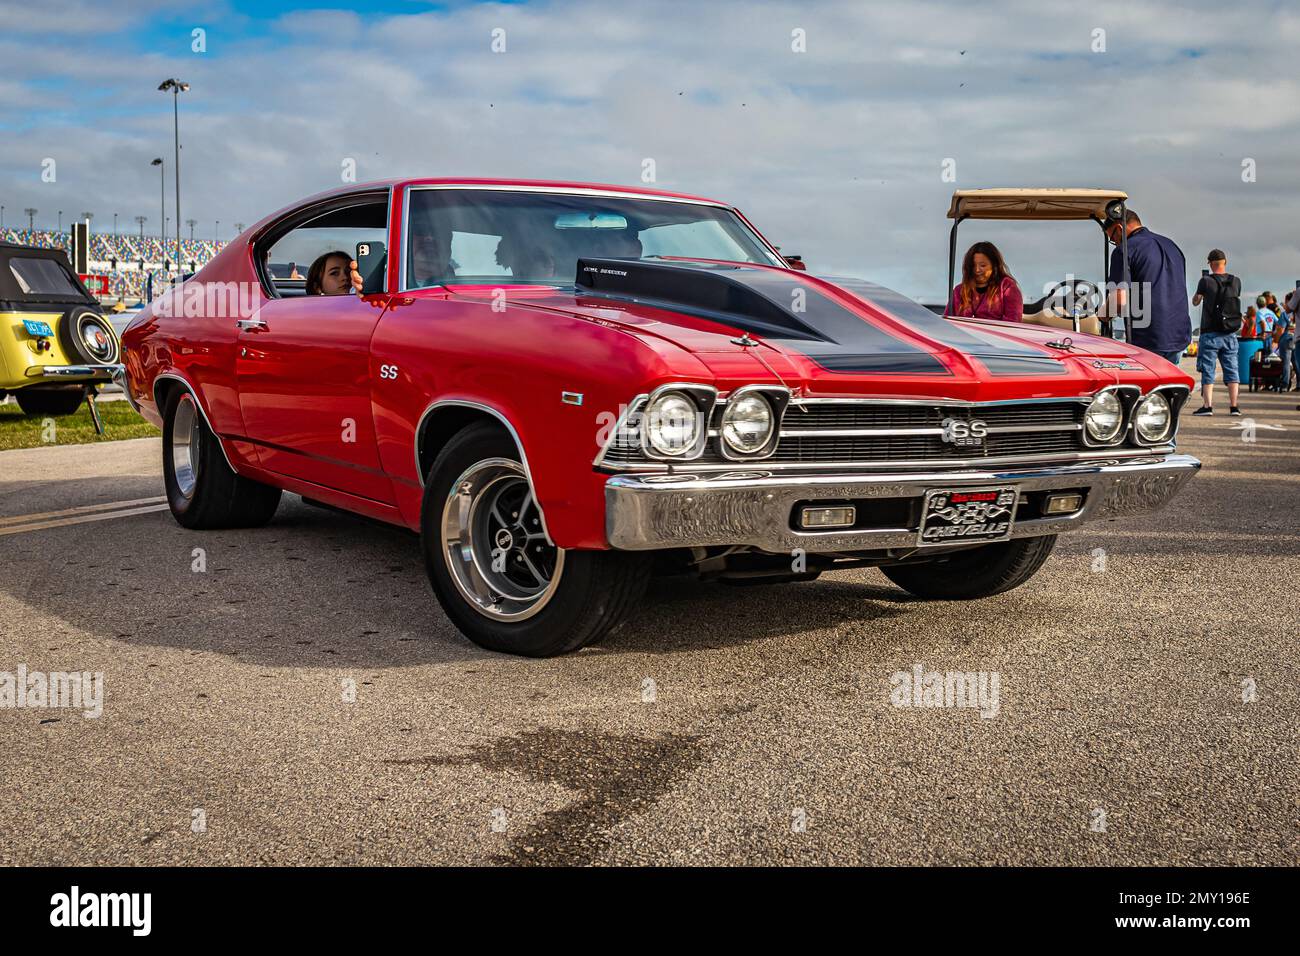 Daytona Beach, FL - November 26, 2022: Low perspective front corner view of a 1969 Chevrolet Chevelle SS Hardtop Coupe at a local car show. Stock Photo